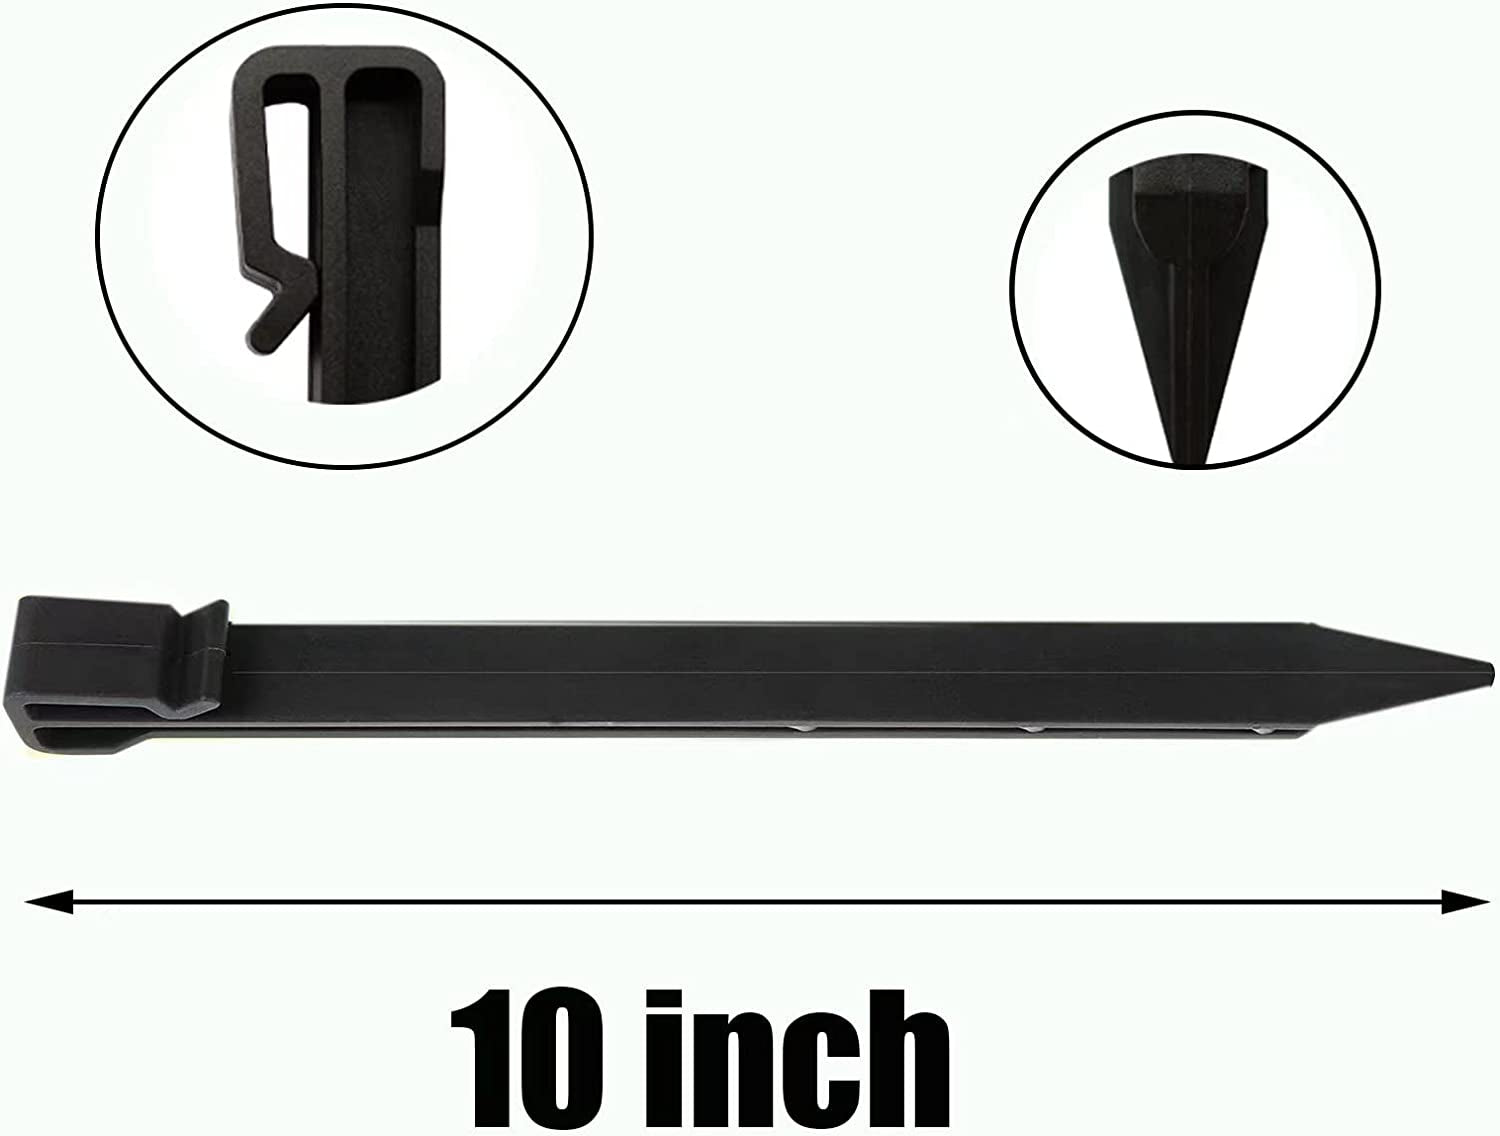 CAROYINO, Edging Stakes, 12 Pcs 10 Inch Heavy Duty Plastic Landscape Edging Stakes, Anchoring Spikes for Edging & Terrace Board (12, Black)